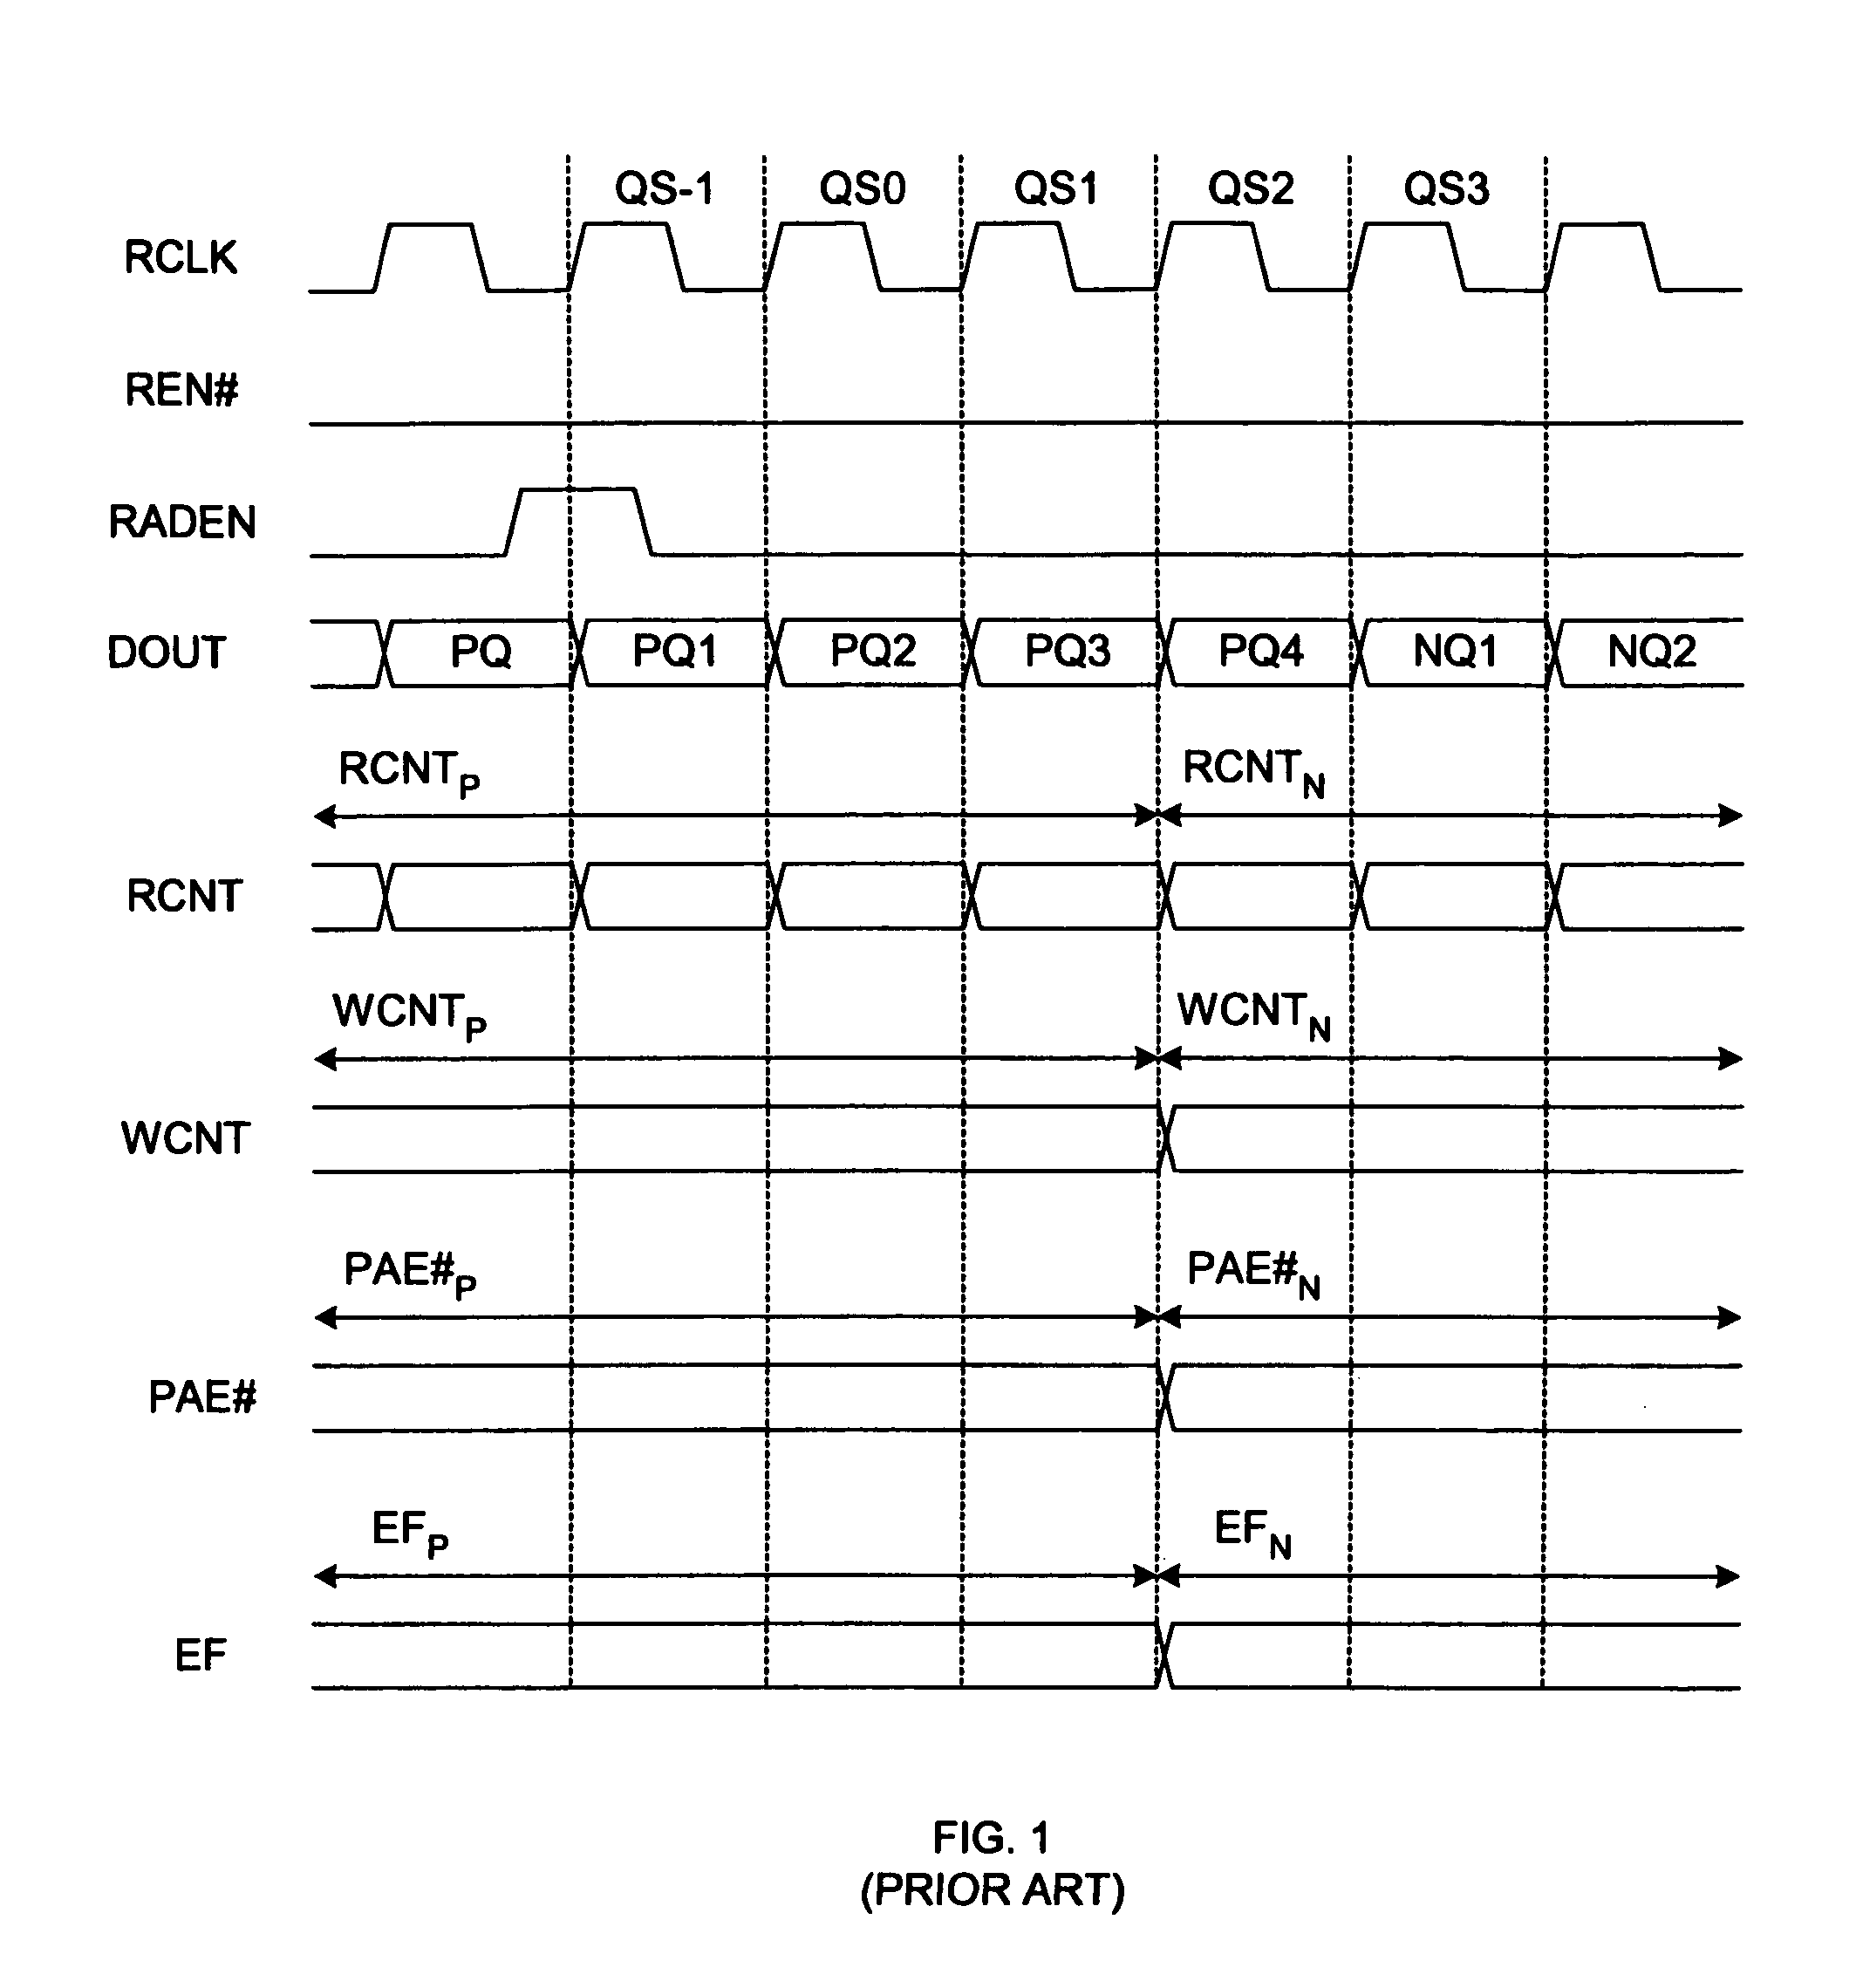 Partial packet read/write and data filtering in a multi-queue first-in first-out memory system